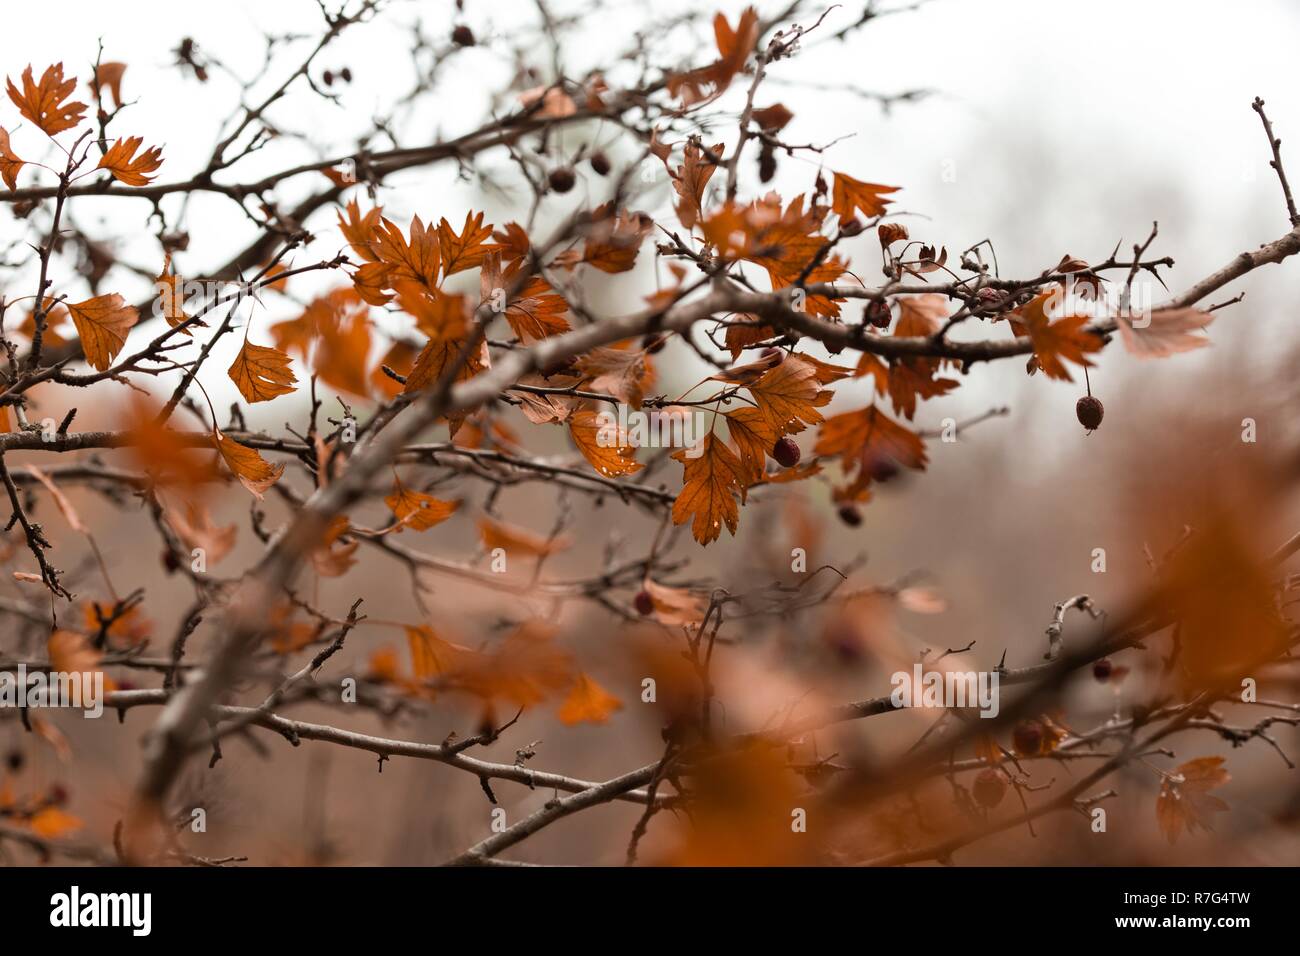 Autumn branches with red berries of barberry Stock Photo